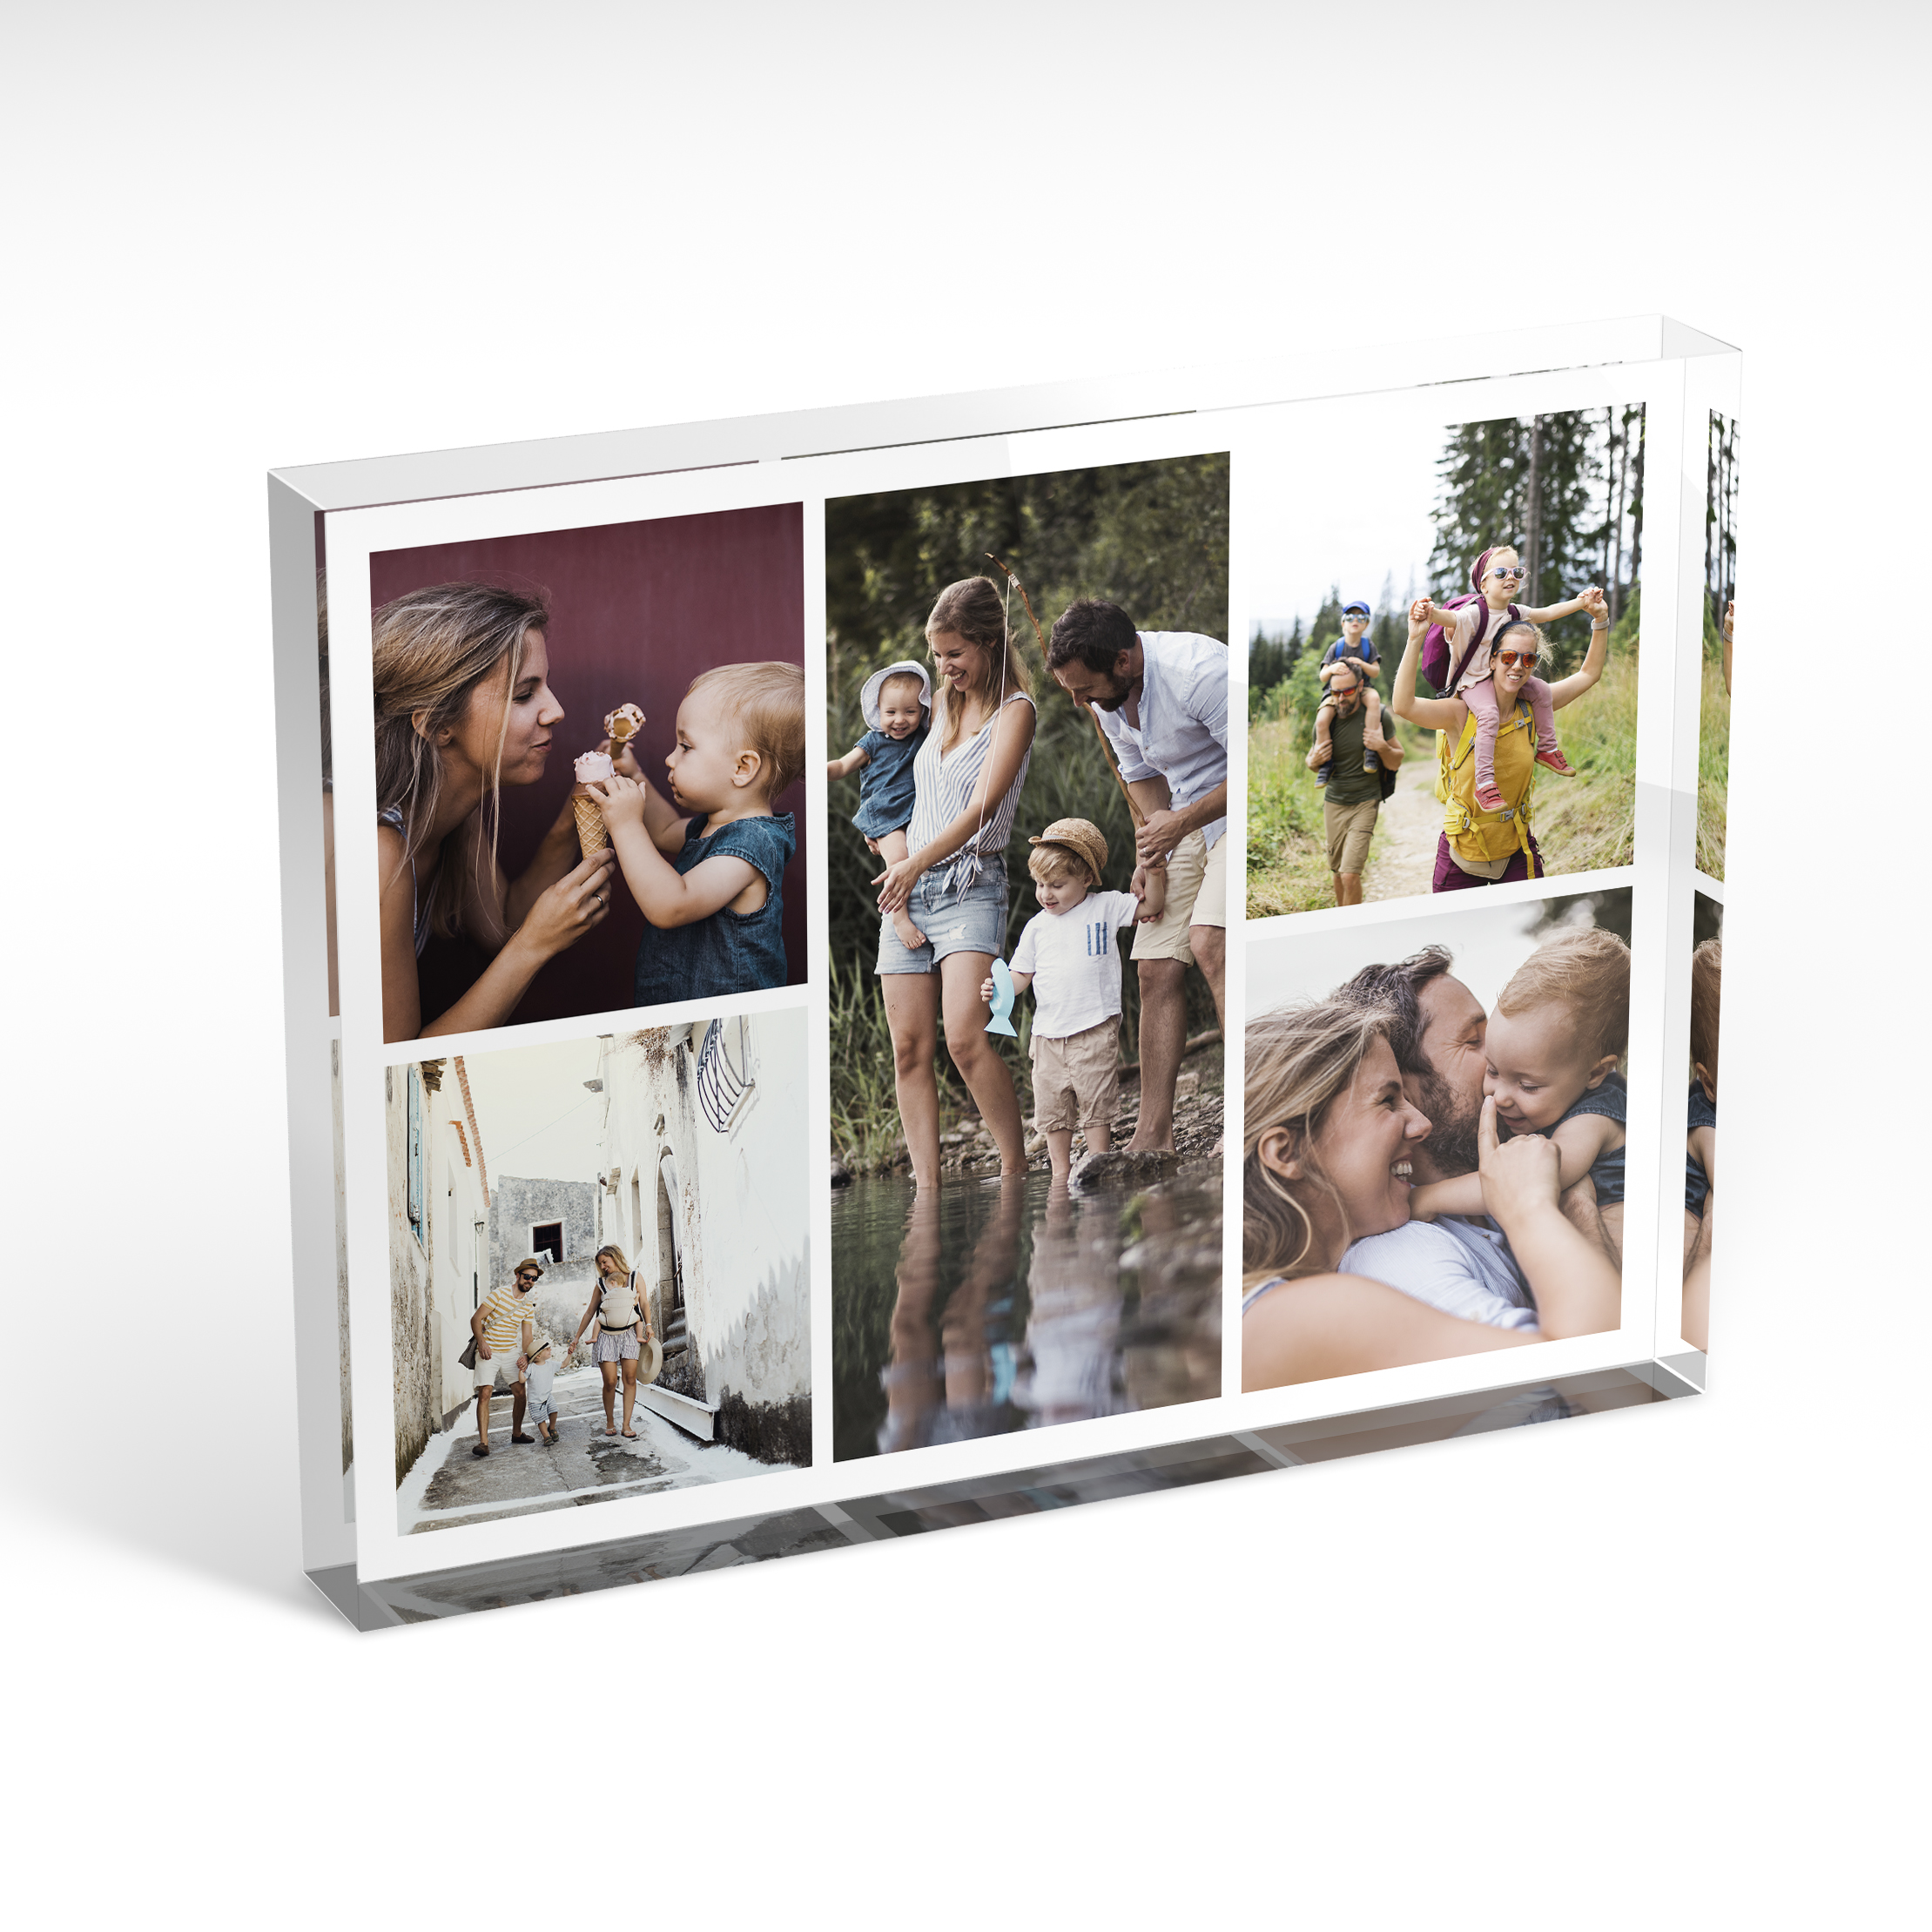 An angled side view of a landscape layout Acrylic Glass Photo Block with space for 5 photos. Thiis design is named "Fivefold Memories". 